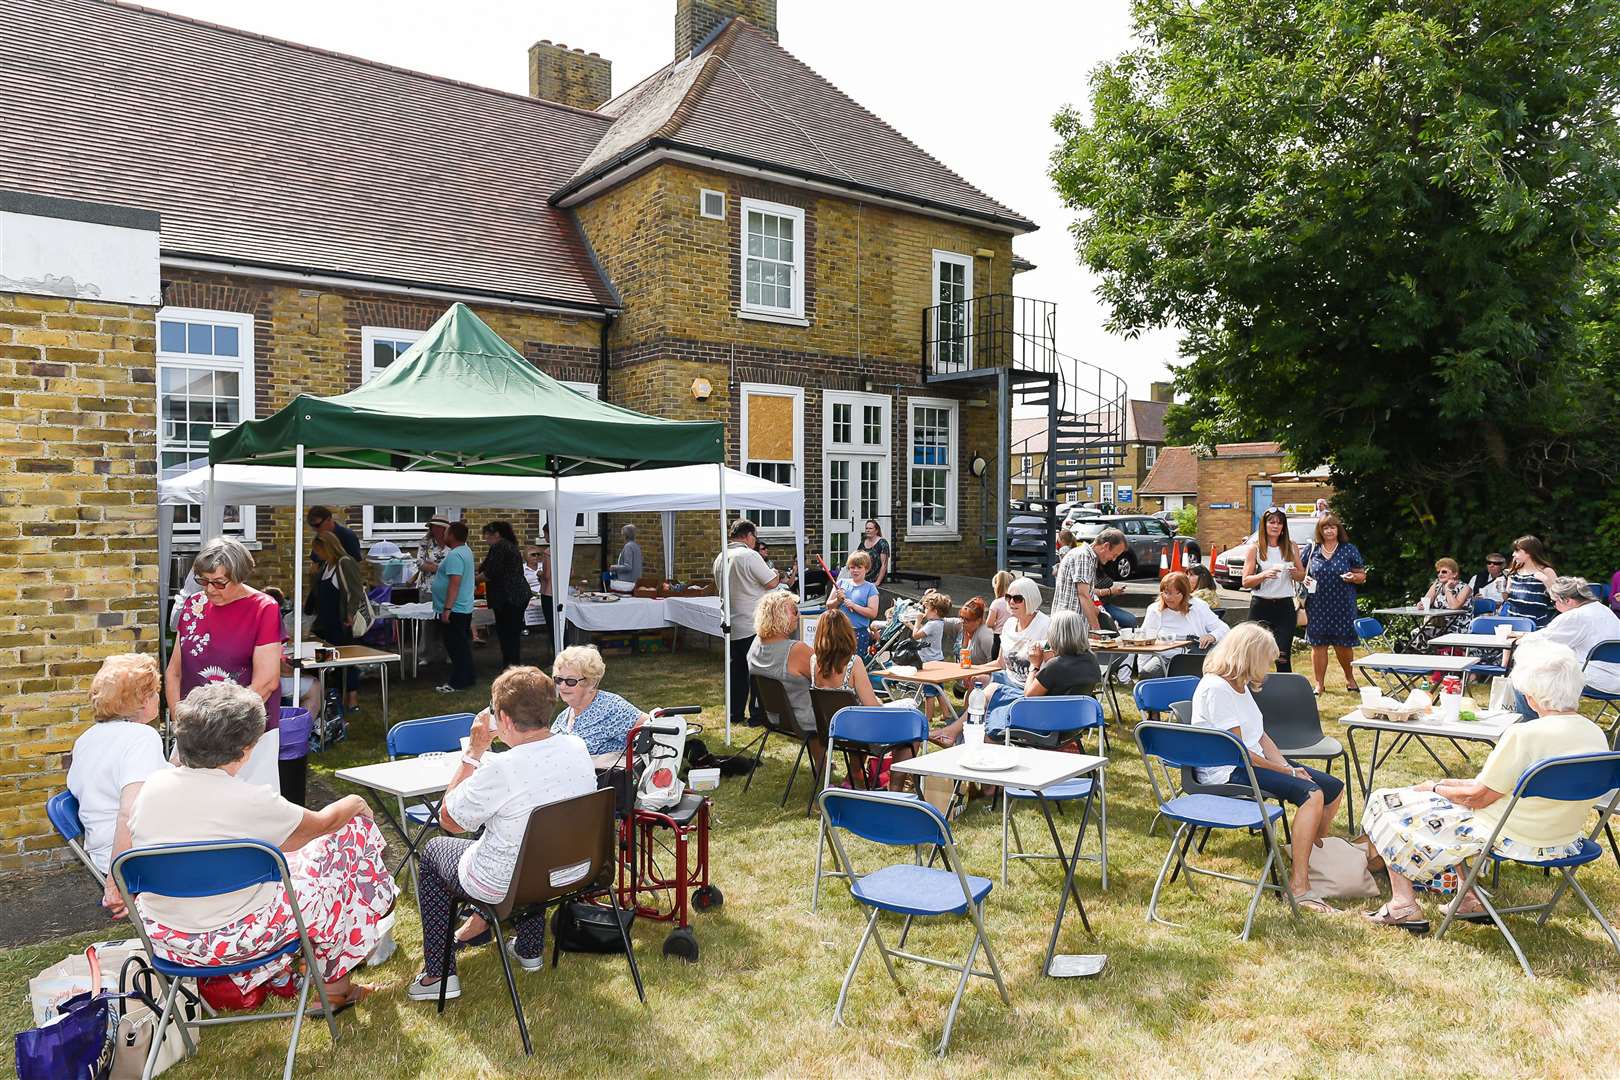 Deal Hospital Fete was a success last year but this year it had to be called off